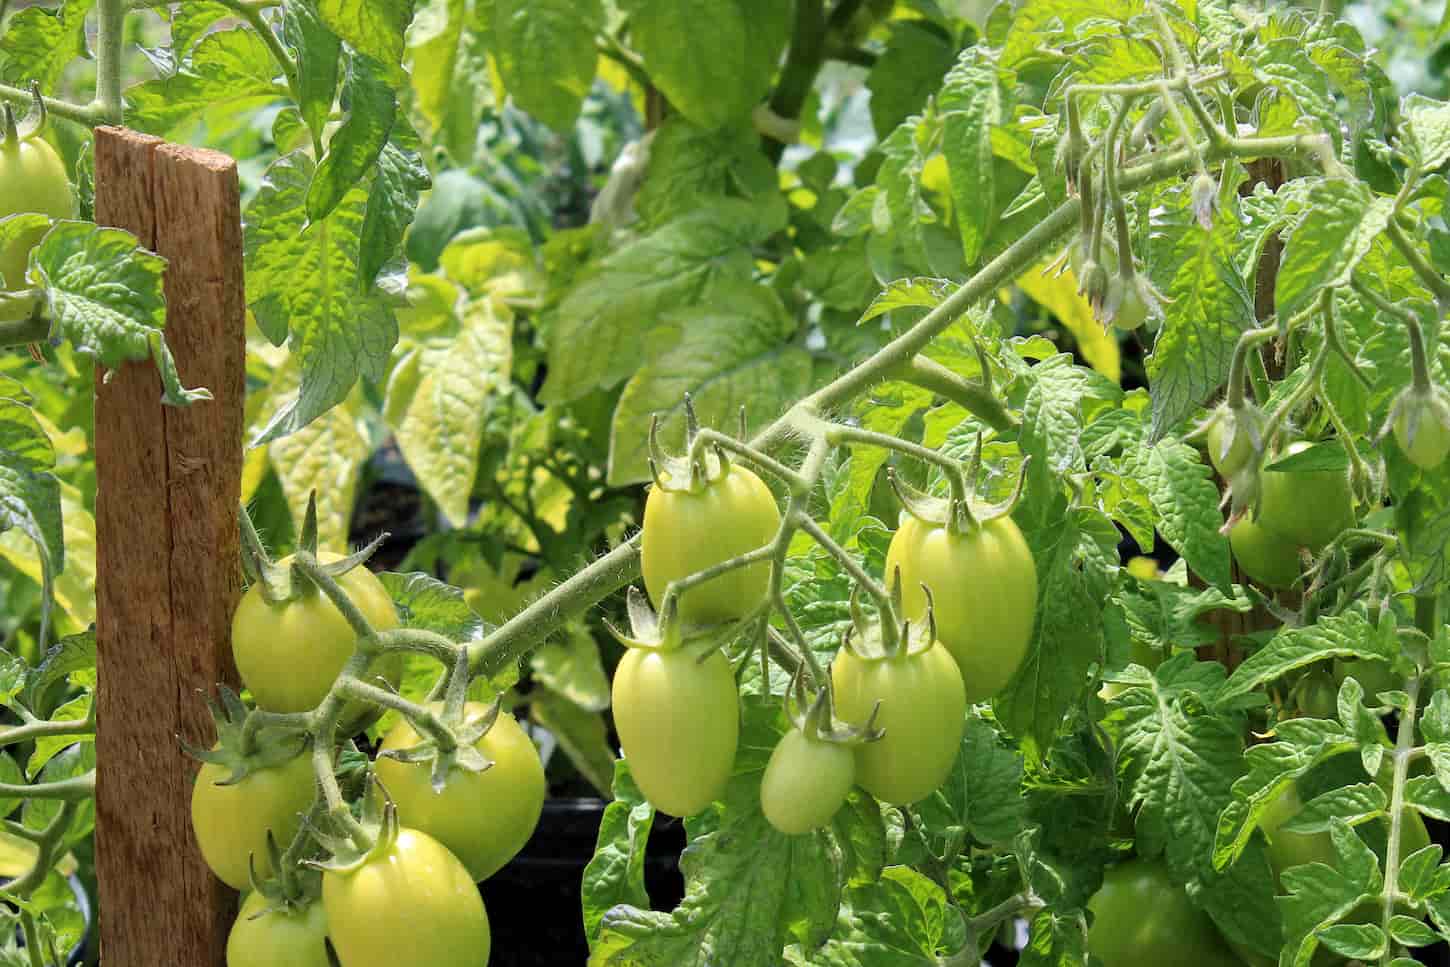 An image of green tomatoes in the garden.